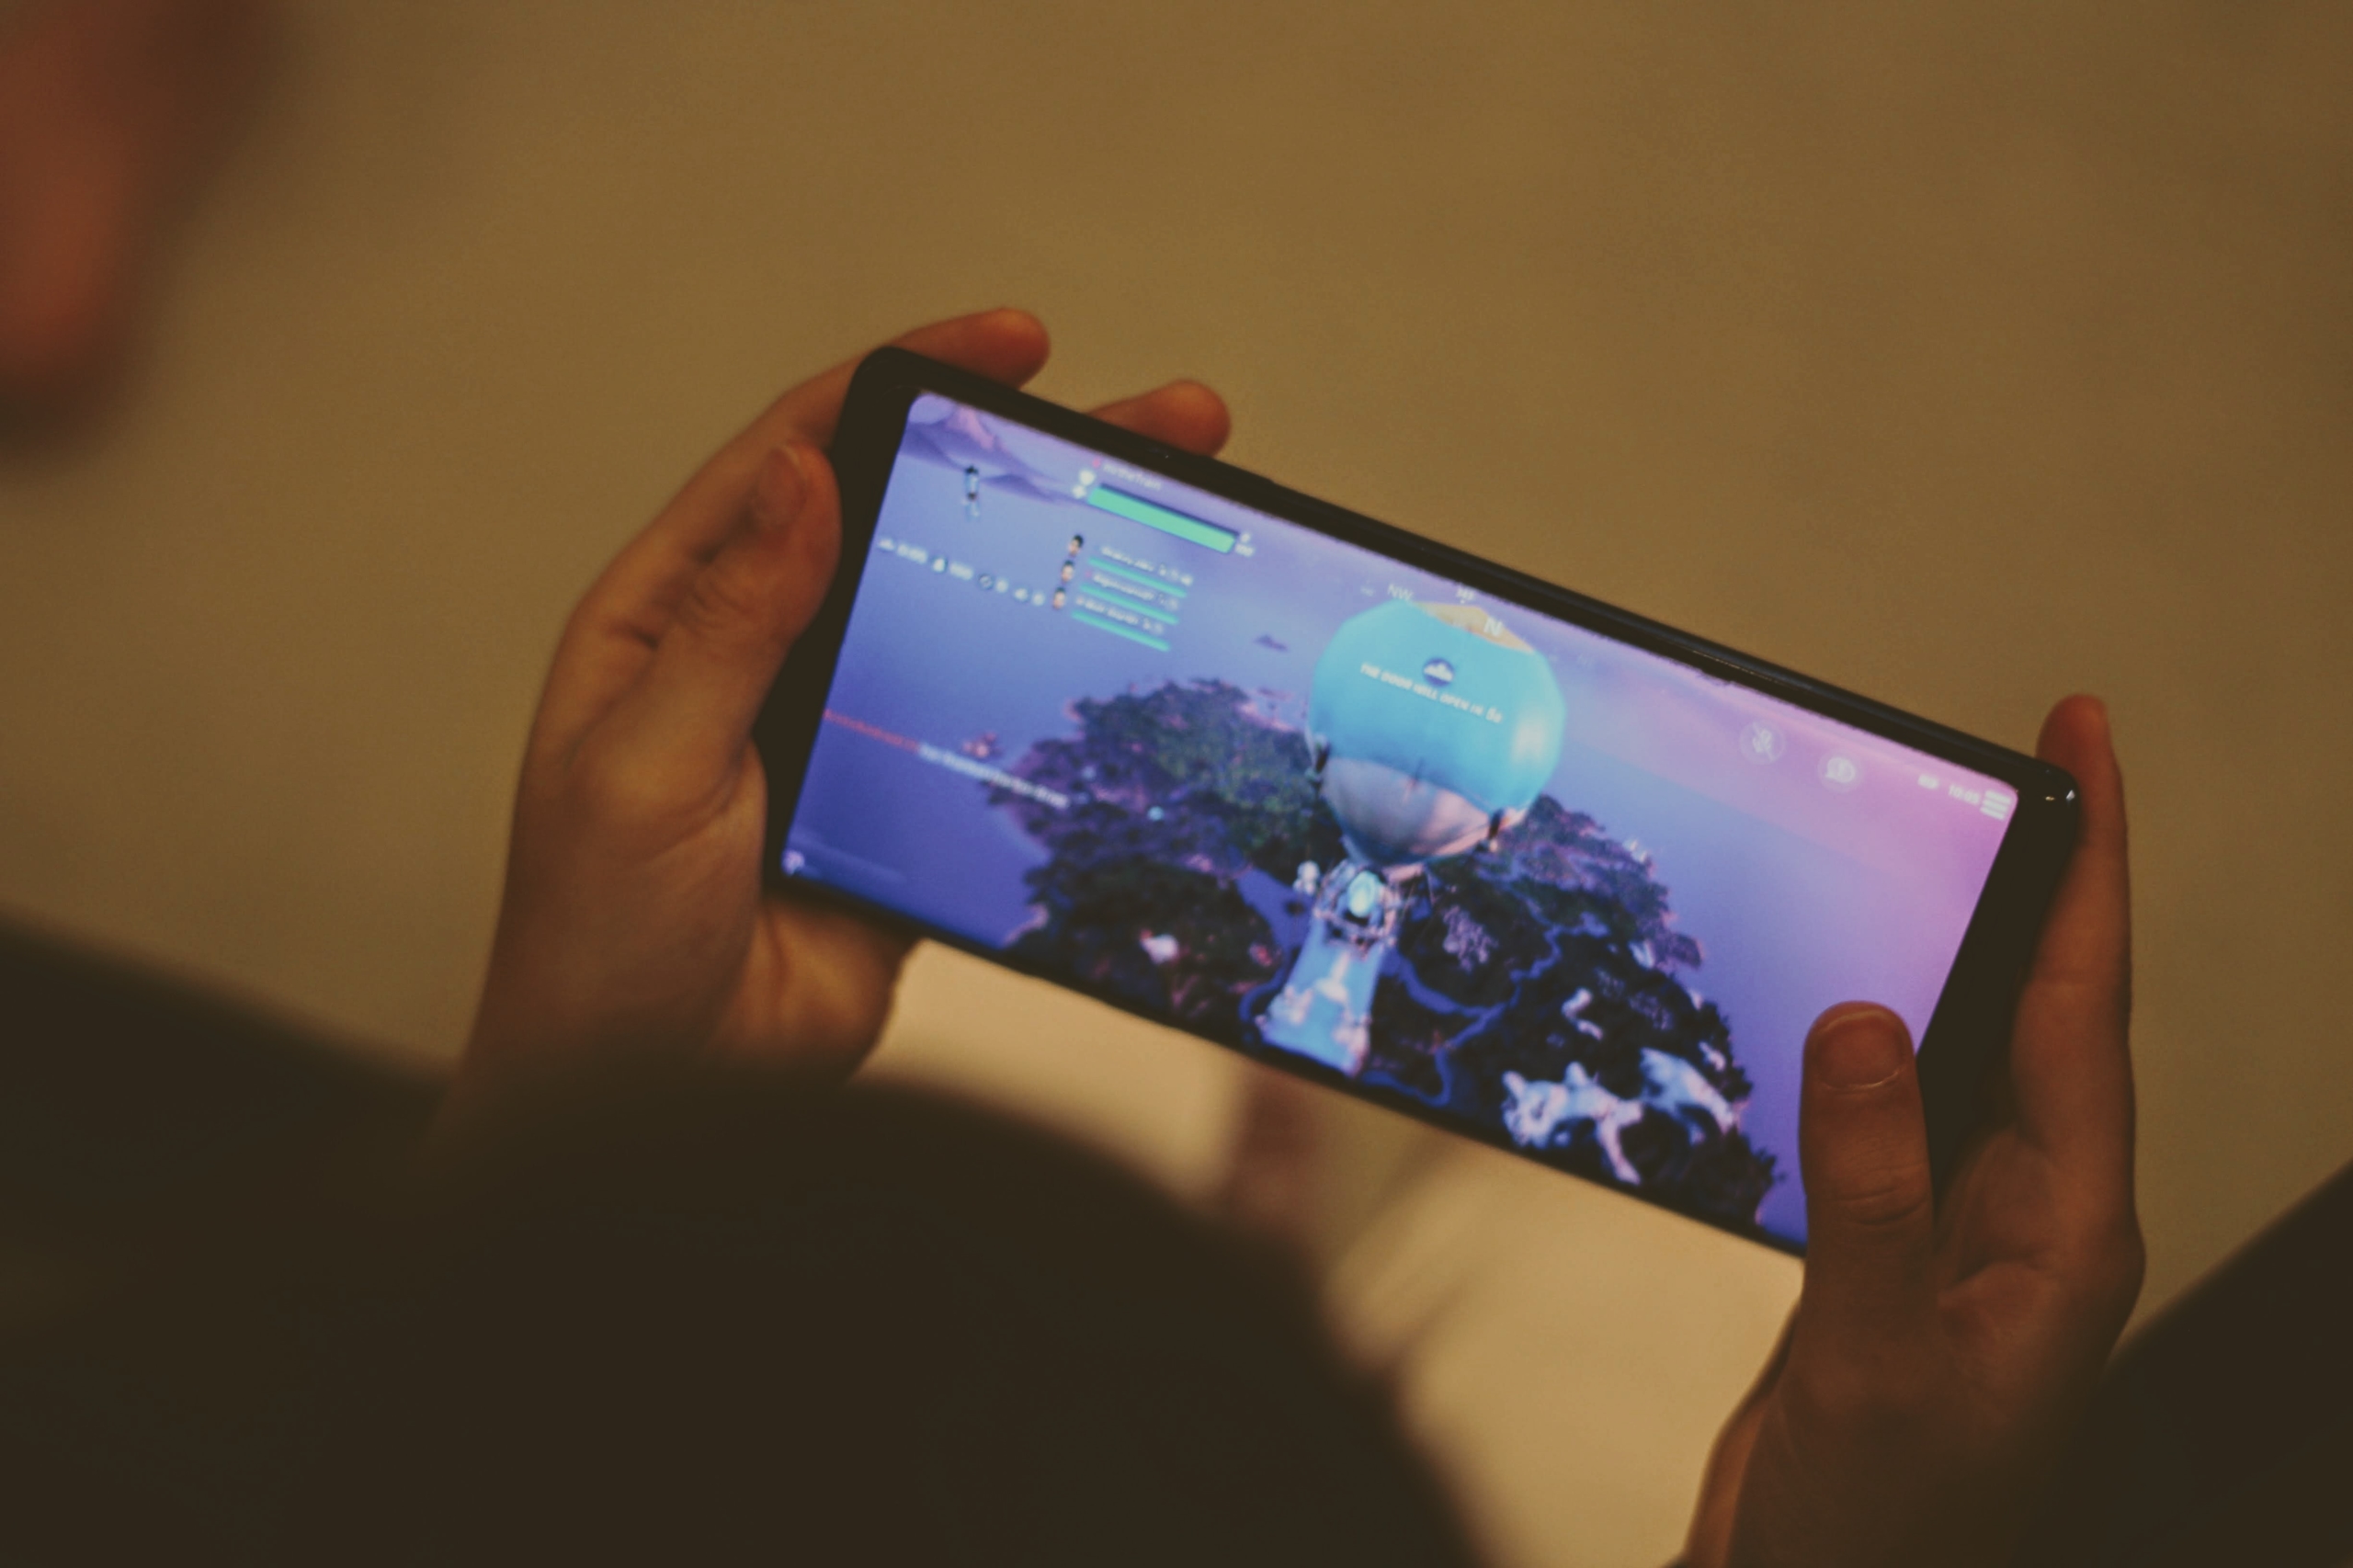 How to Play Fortnite on Samsung Smartphones